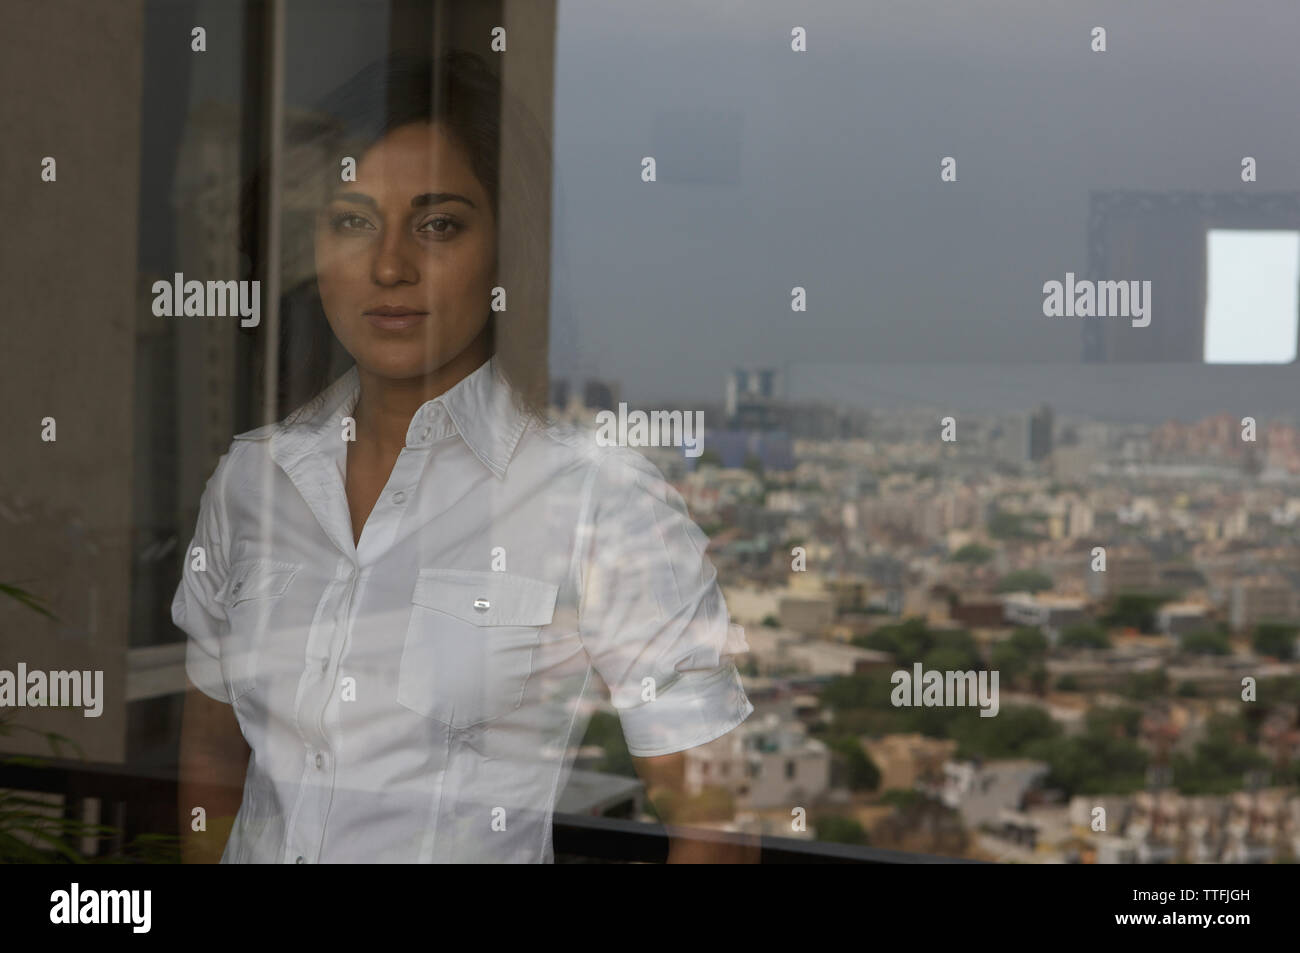 Reflection of a woman in a window glass, Haryana, India Stock Photo